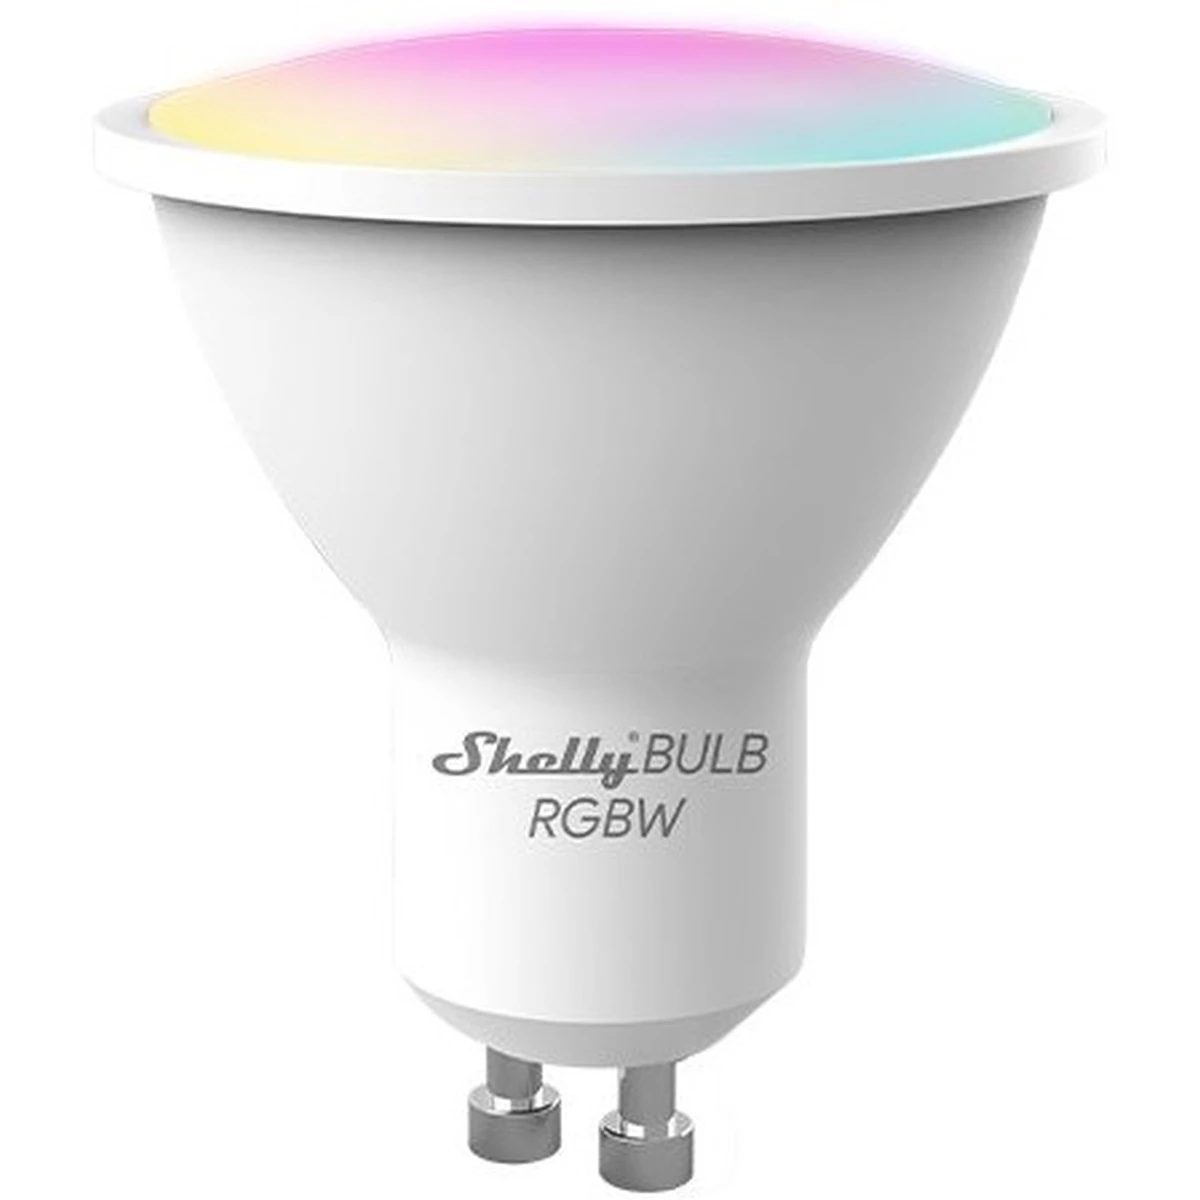 Home Shelly Plug & Play Beleuchtung “Duo RGBW GU10“ WLAN LED Lampe